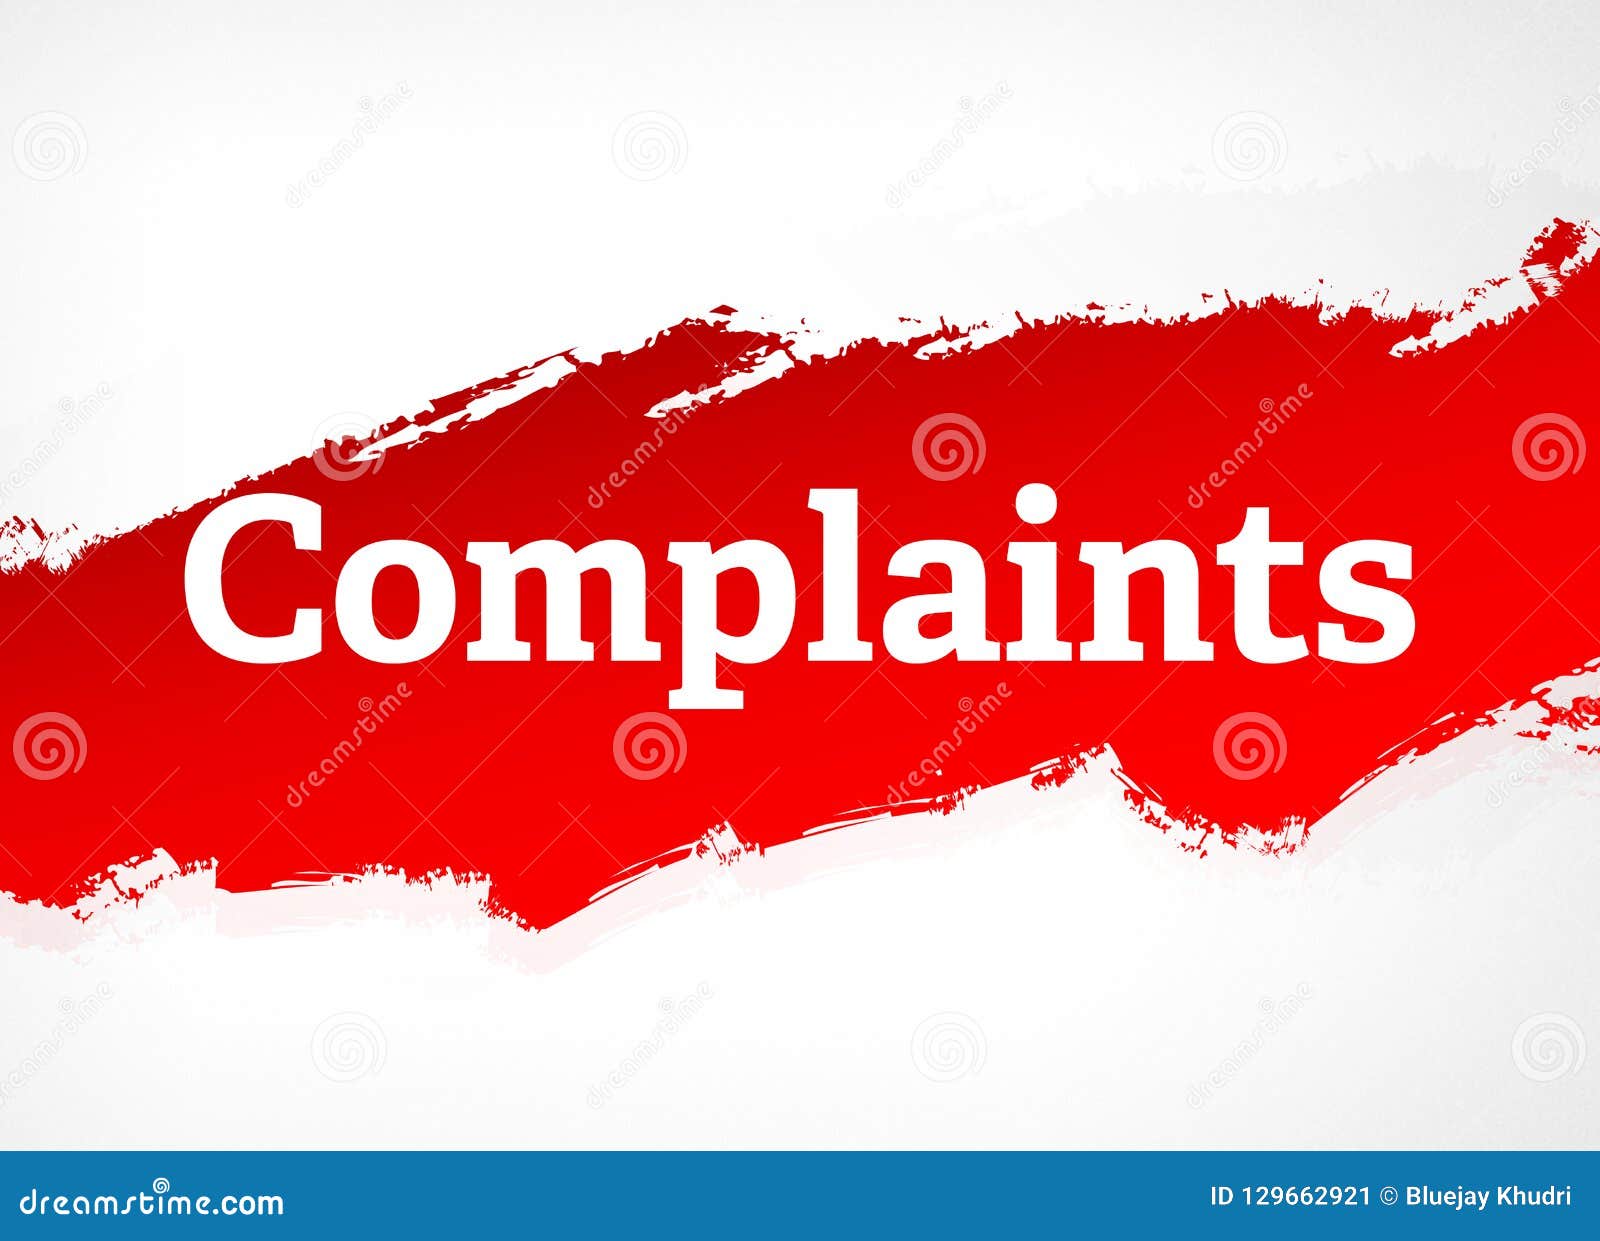 complaints red brush abstract background 